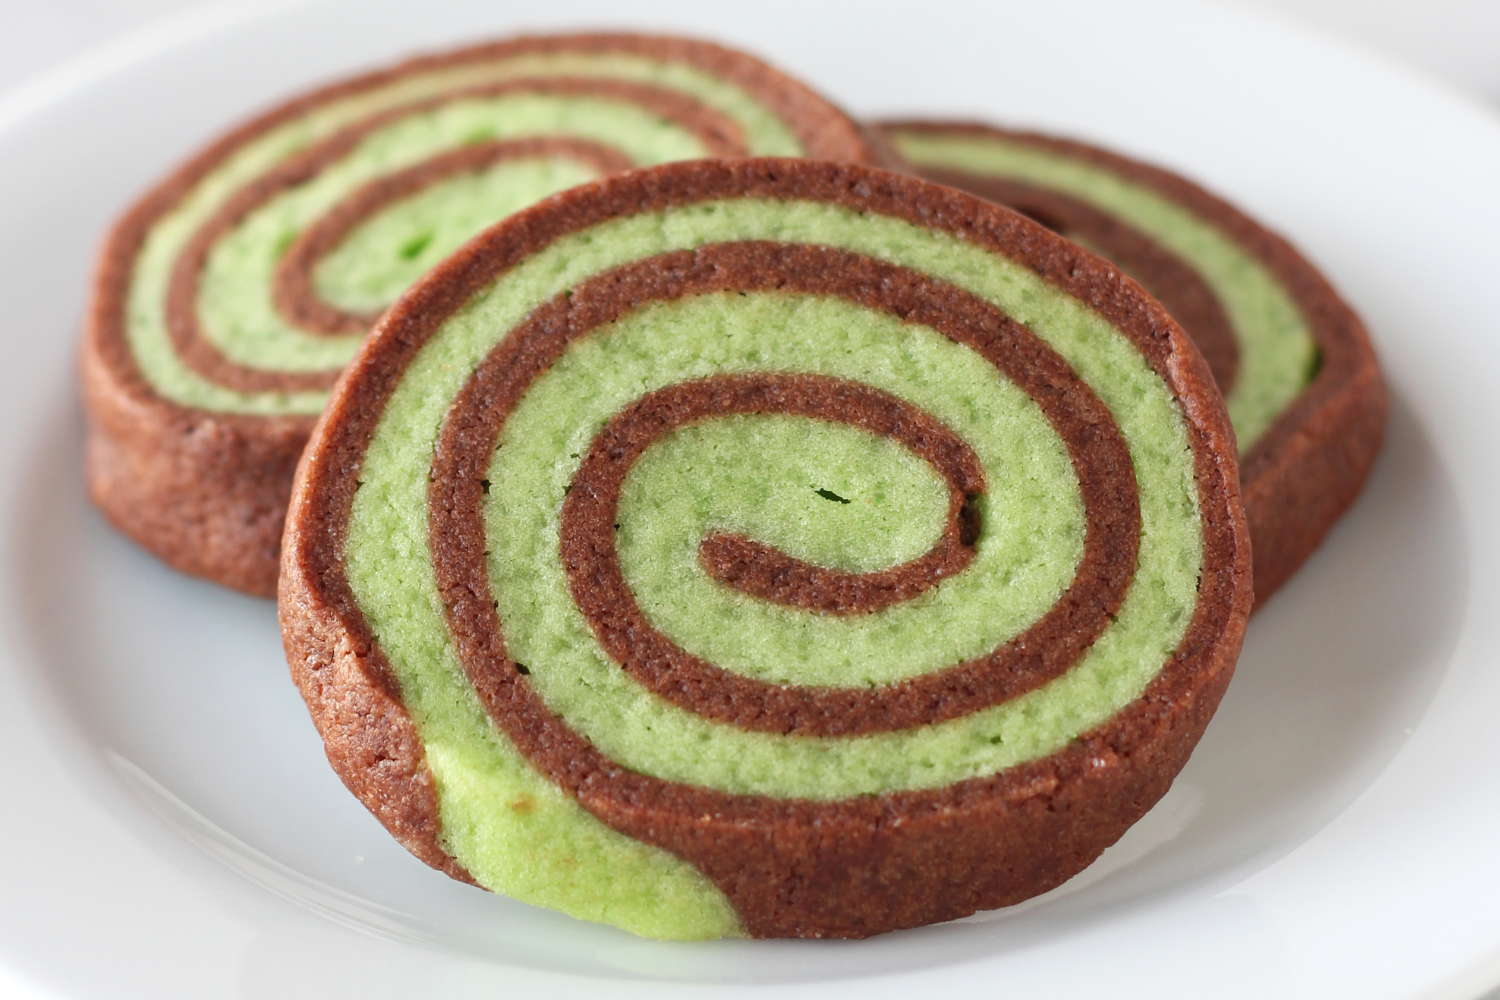 peppermint chocolate pinwheel cookies on a plate.